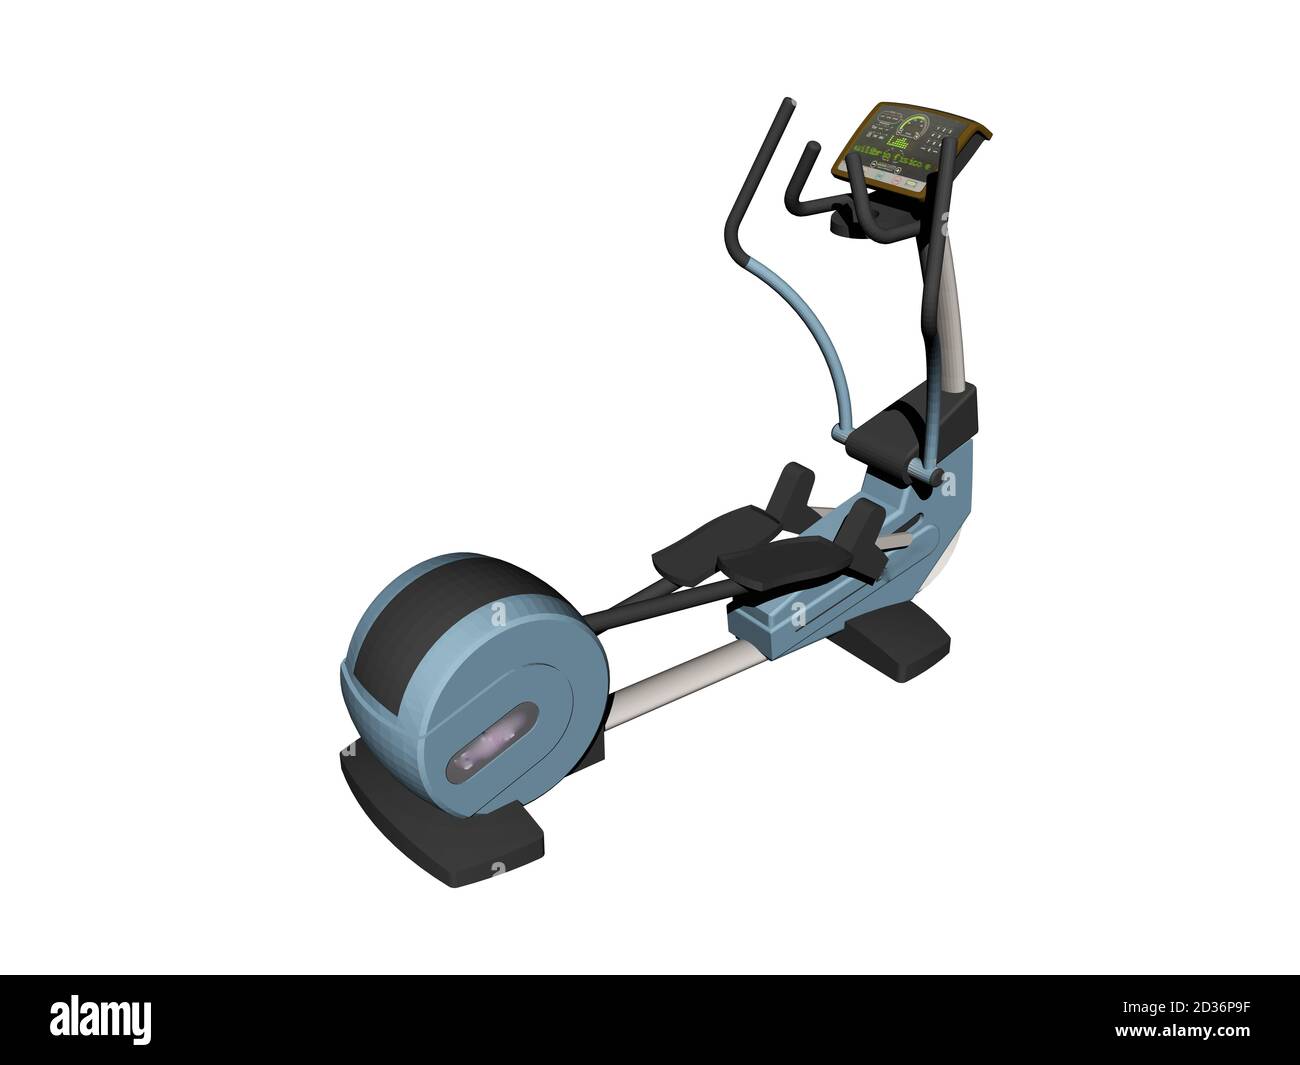 Exercise bike in the gym for exercise Stock Photo